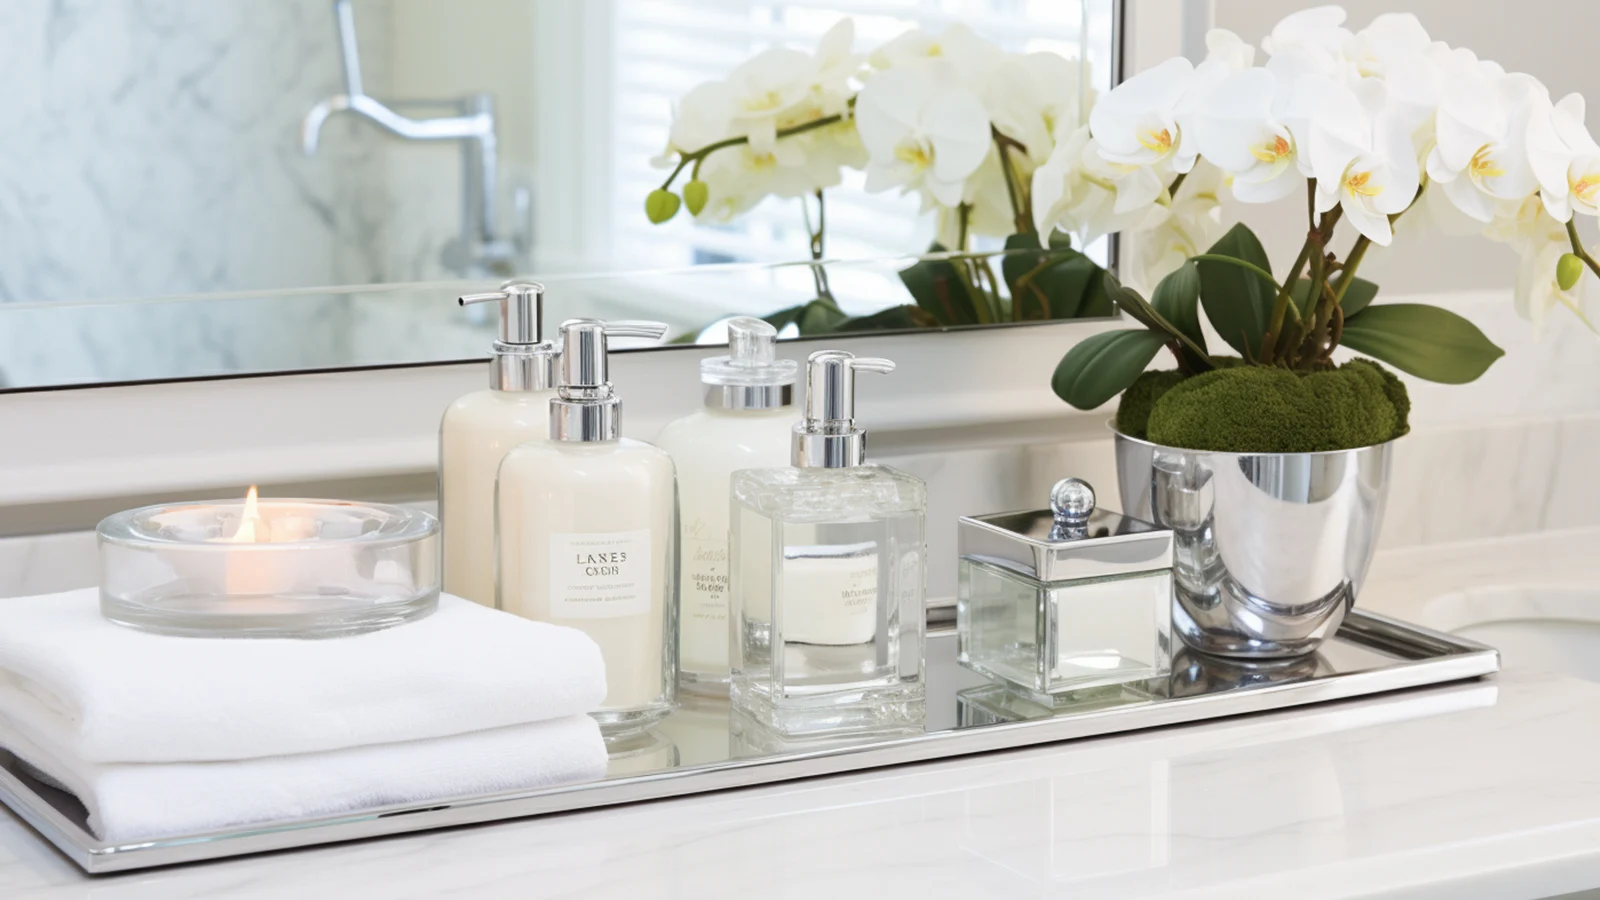 Small bathroom counter decorating ideas: a bathroom vanity with a tray of lotions, soaps, and flowers.